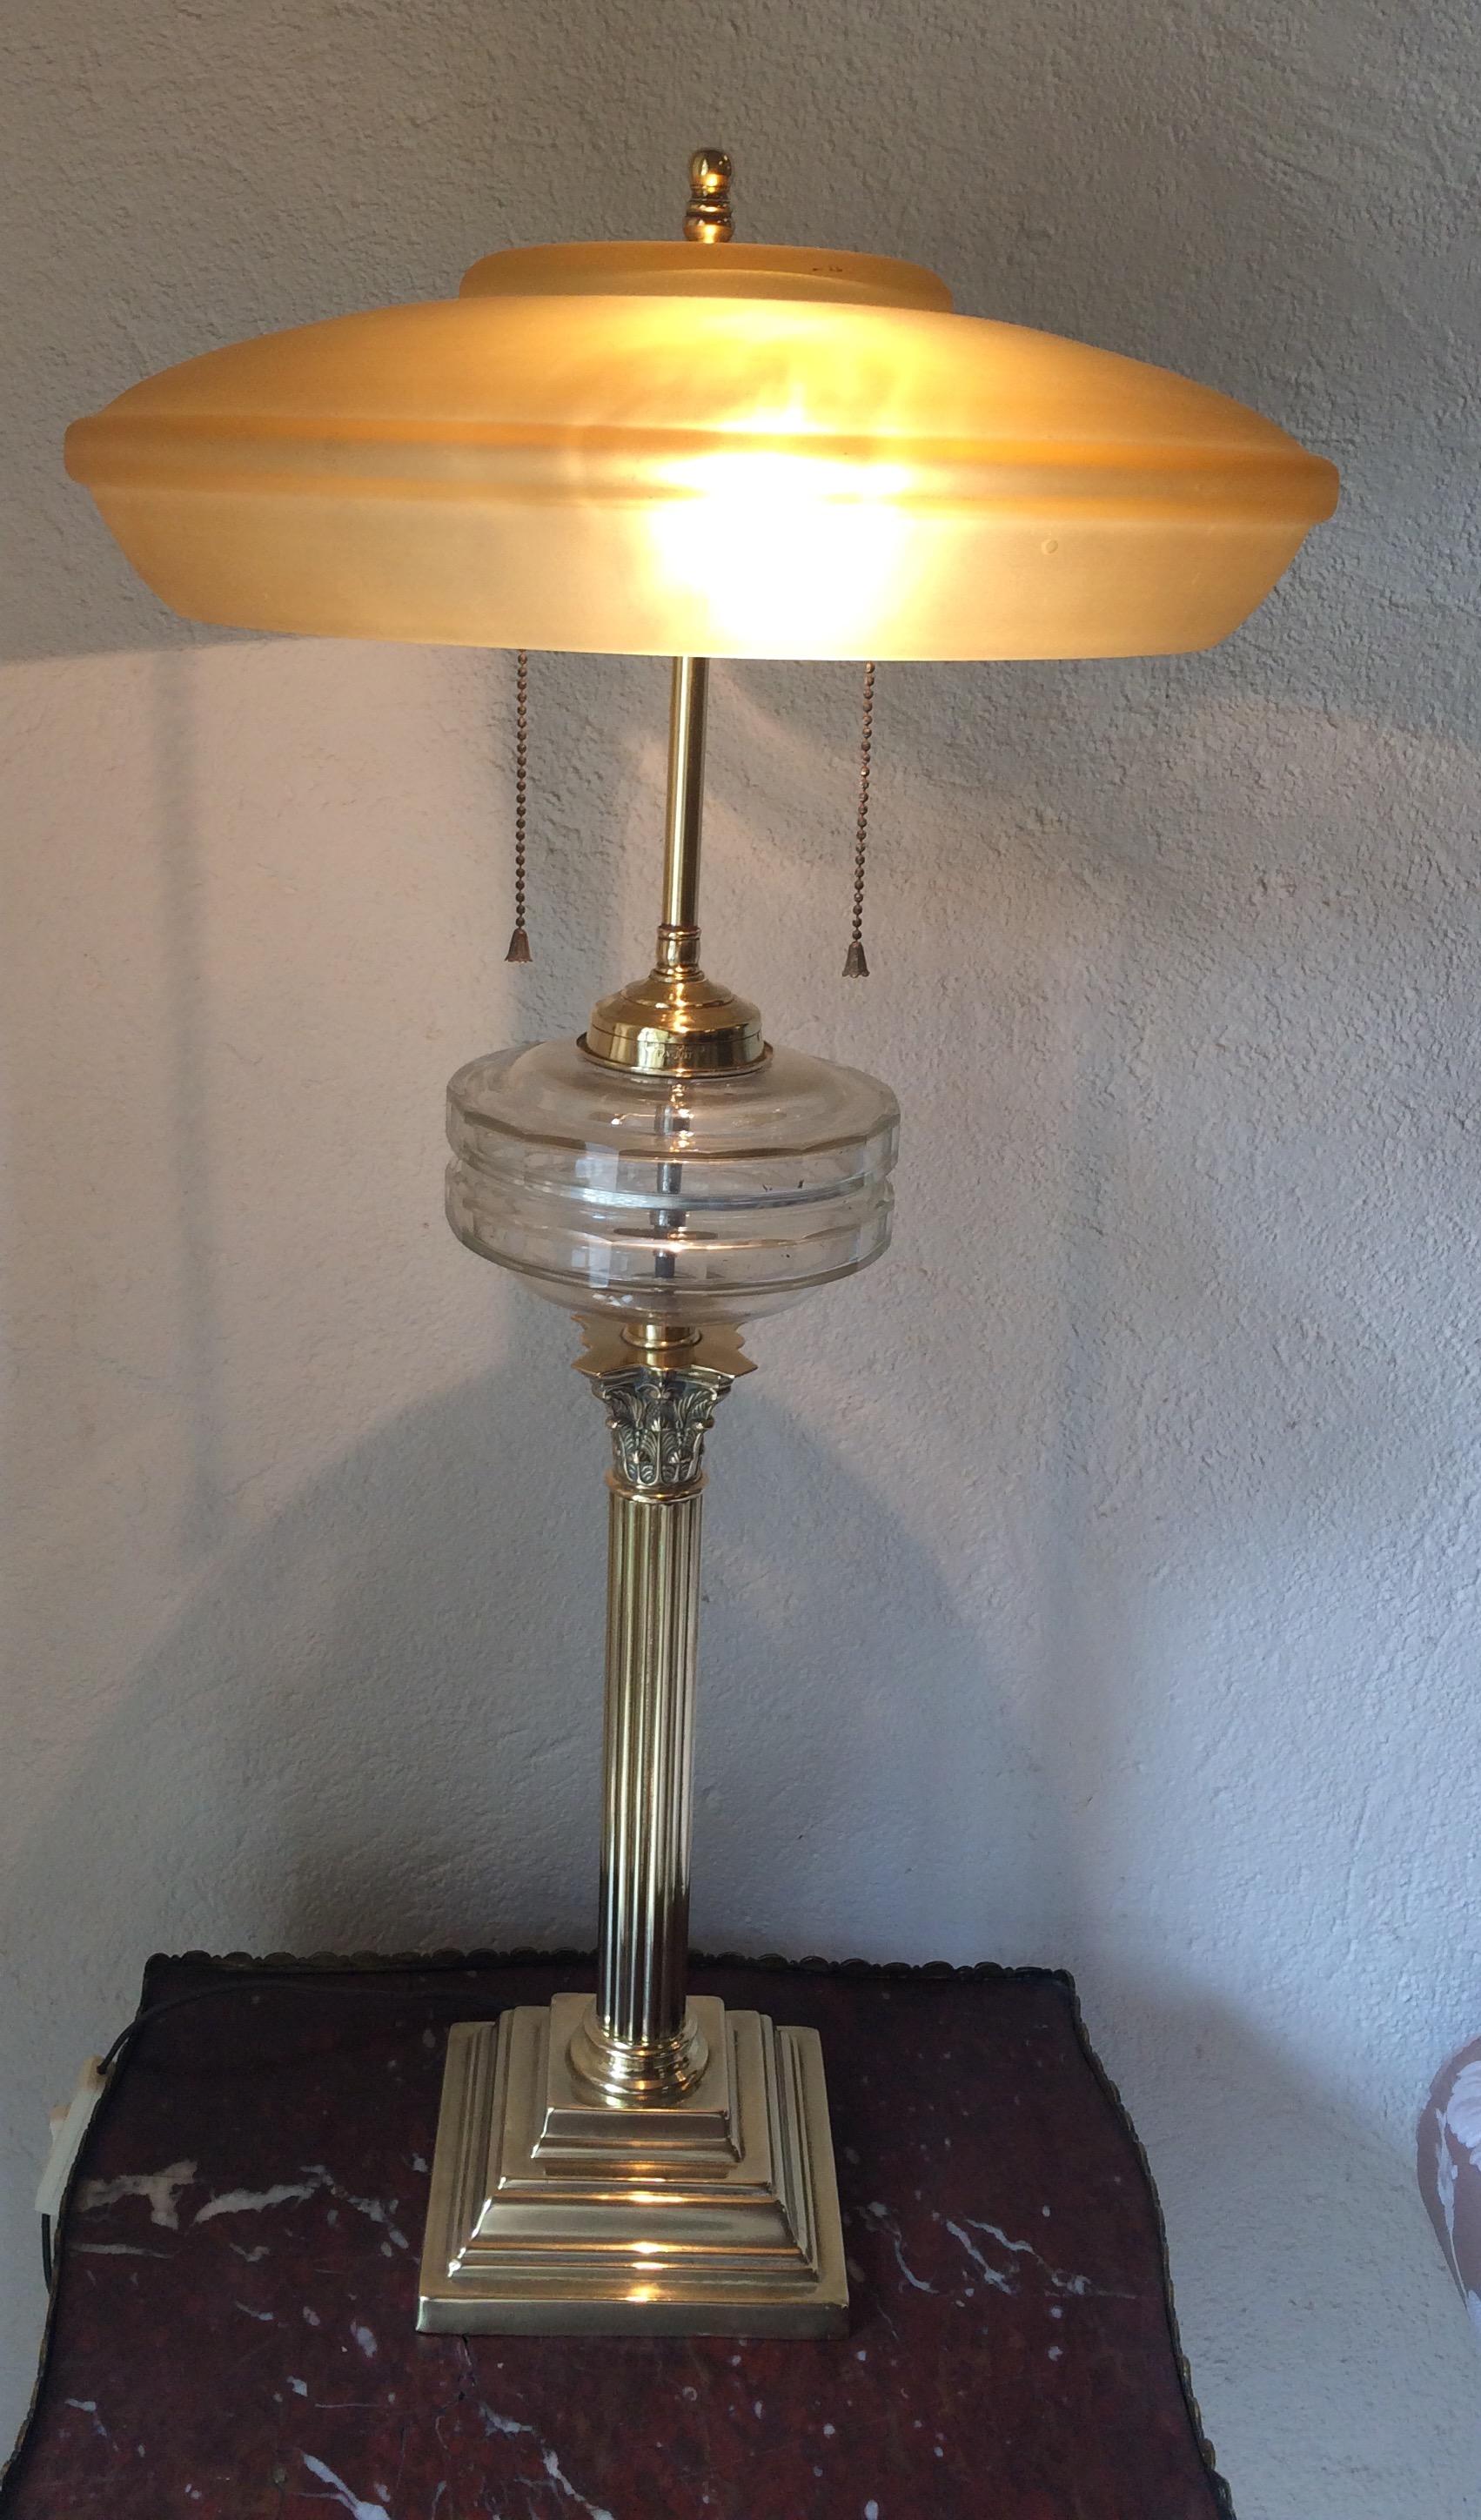 A Messenger's patent brass and cut glass Corinthian column table lamp, formerly an oil lamp, now converted to electricity, circa 1880. Designed by Samuel S Messenger & Sons of Birmingham.

This very decorative lamp is in very good antique condition.